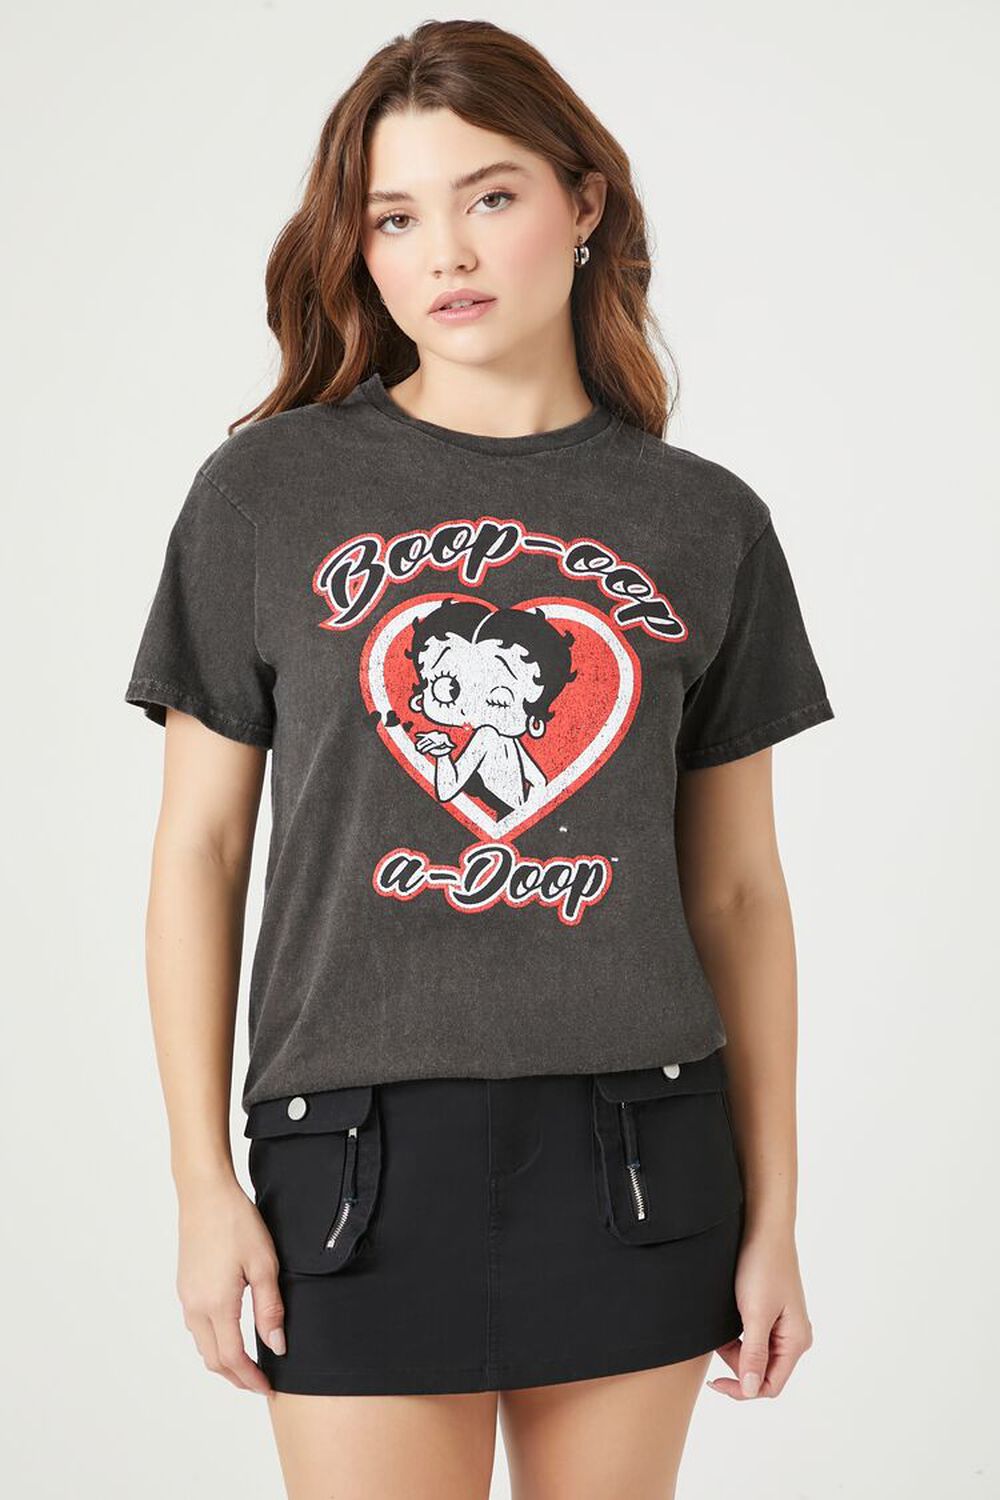 Toddler: Betty Boop - I Love Betty Baby T-Shirt Size 3T